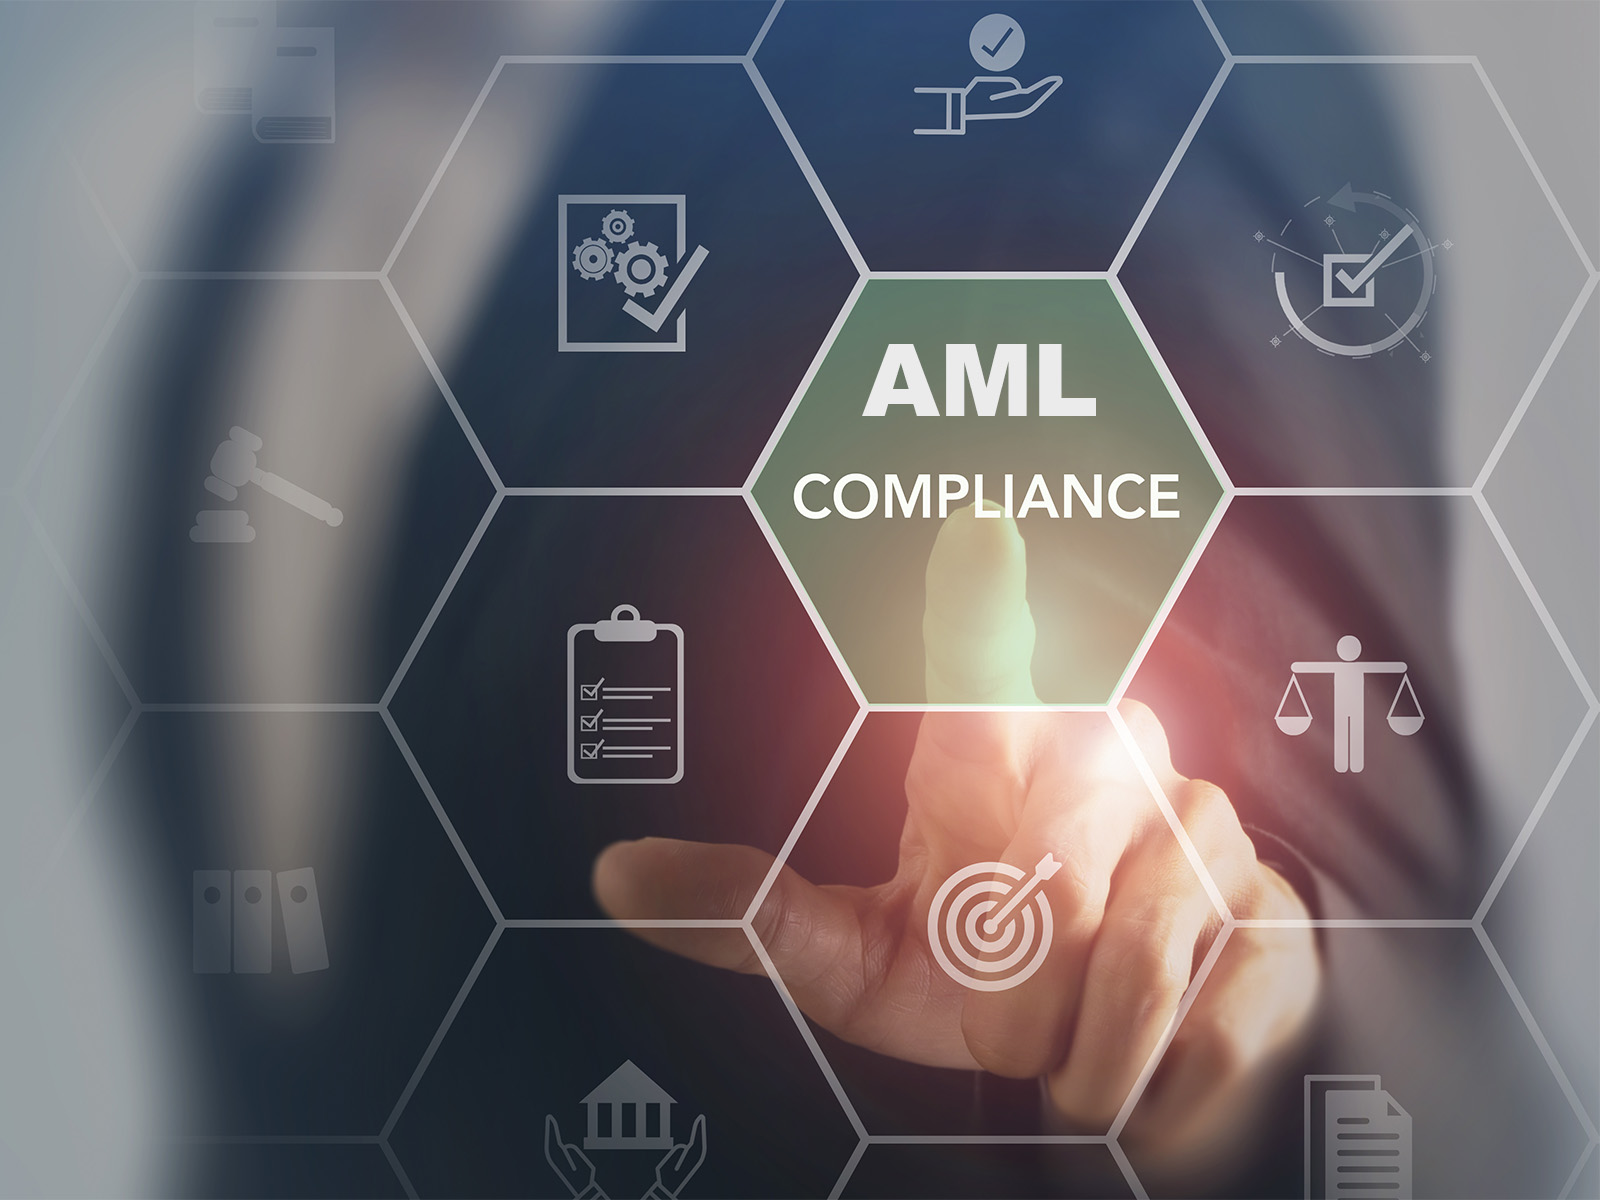 AML Compliance solutions on the RegTechONE platform--Art showing icons for AML Compliance tasks and ideas